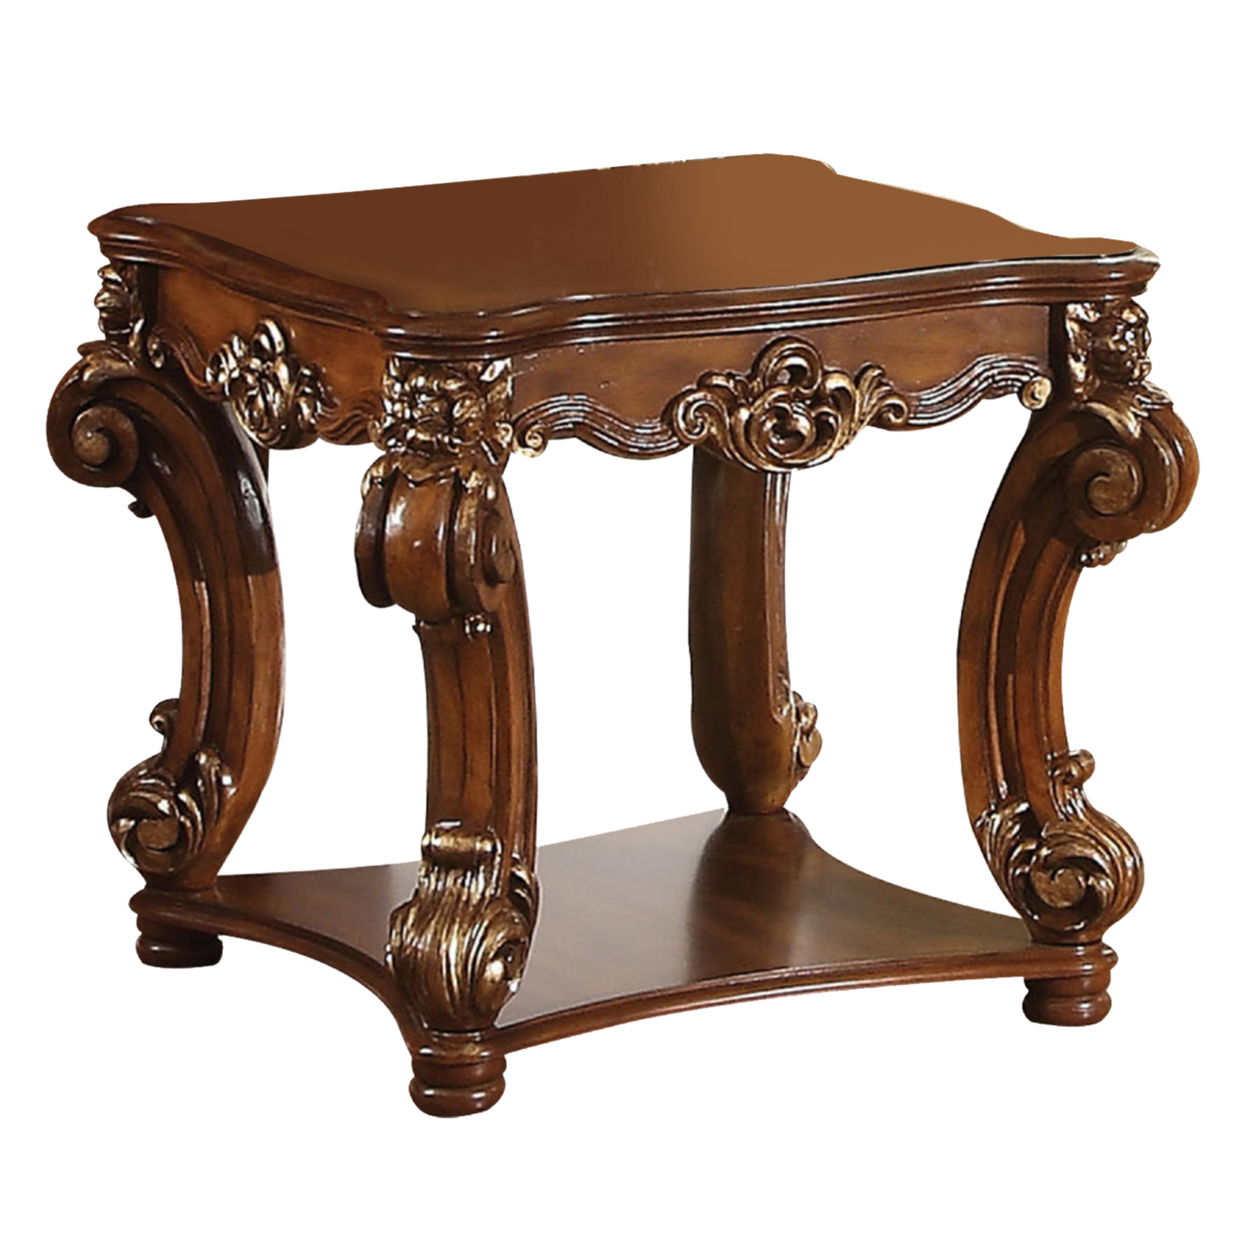 Square Top End Table With Scrolled Leg And Bottom Shelf, Cherry Brown- Saltoro Sherpi